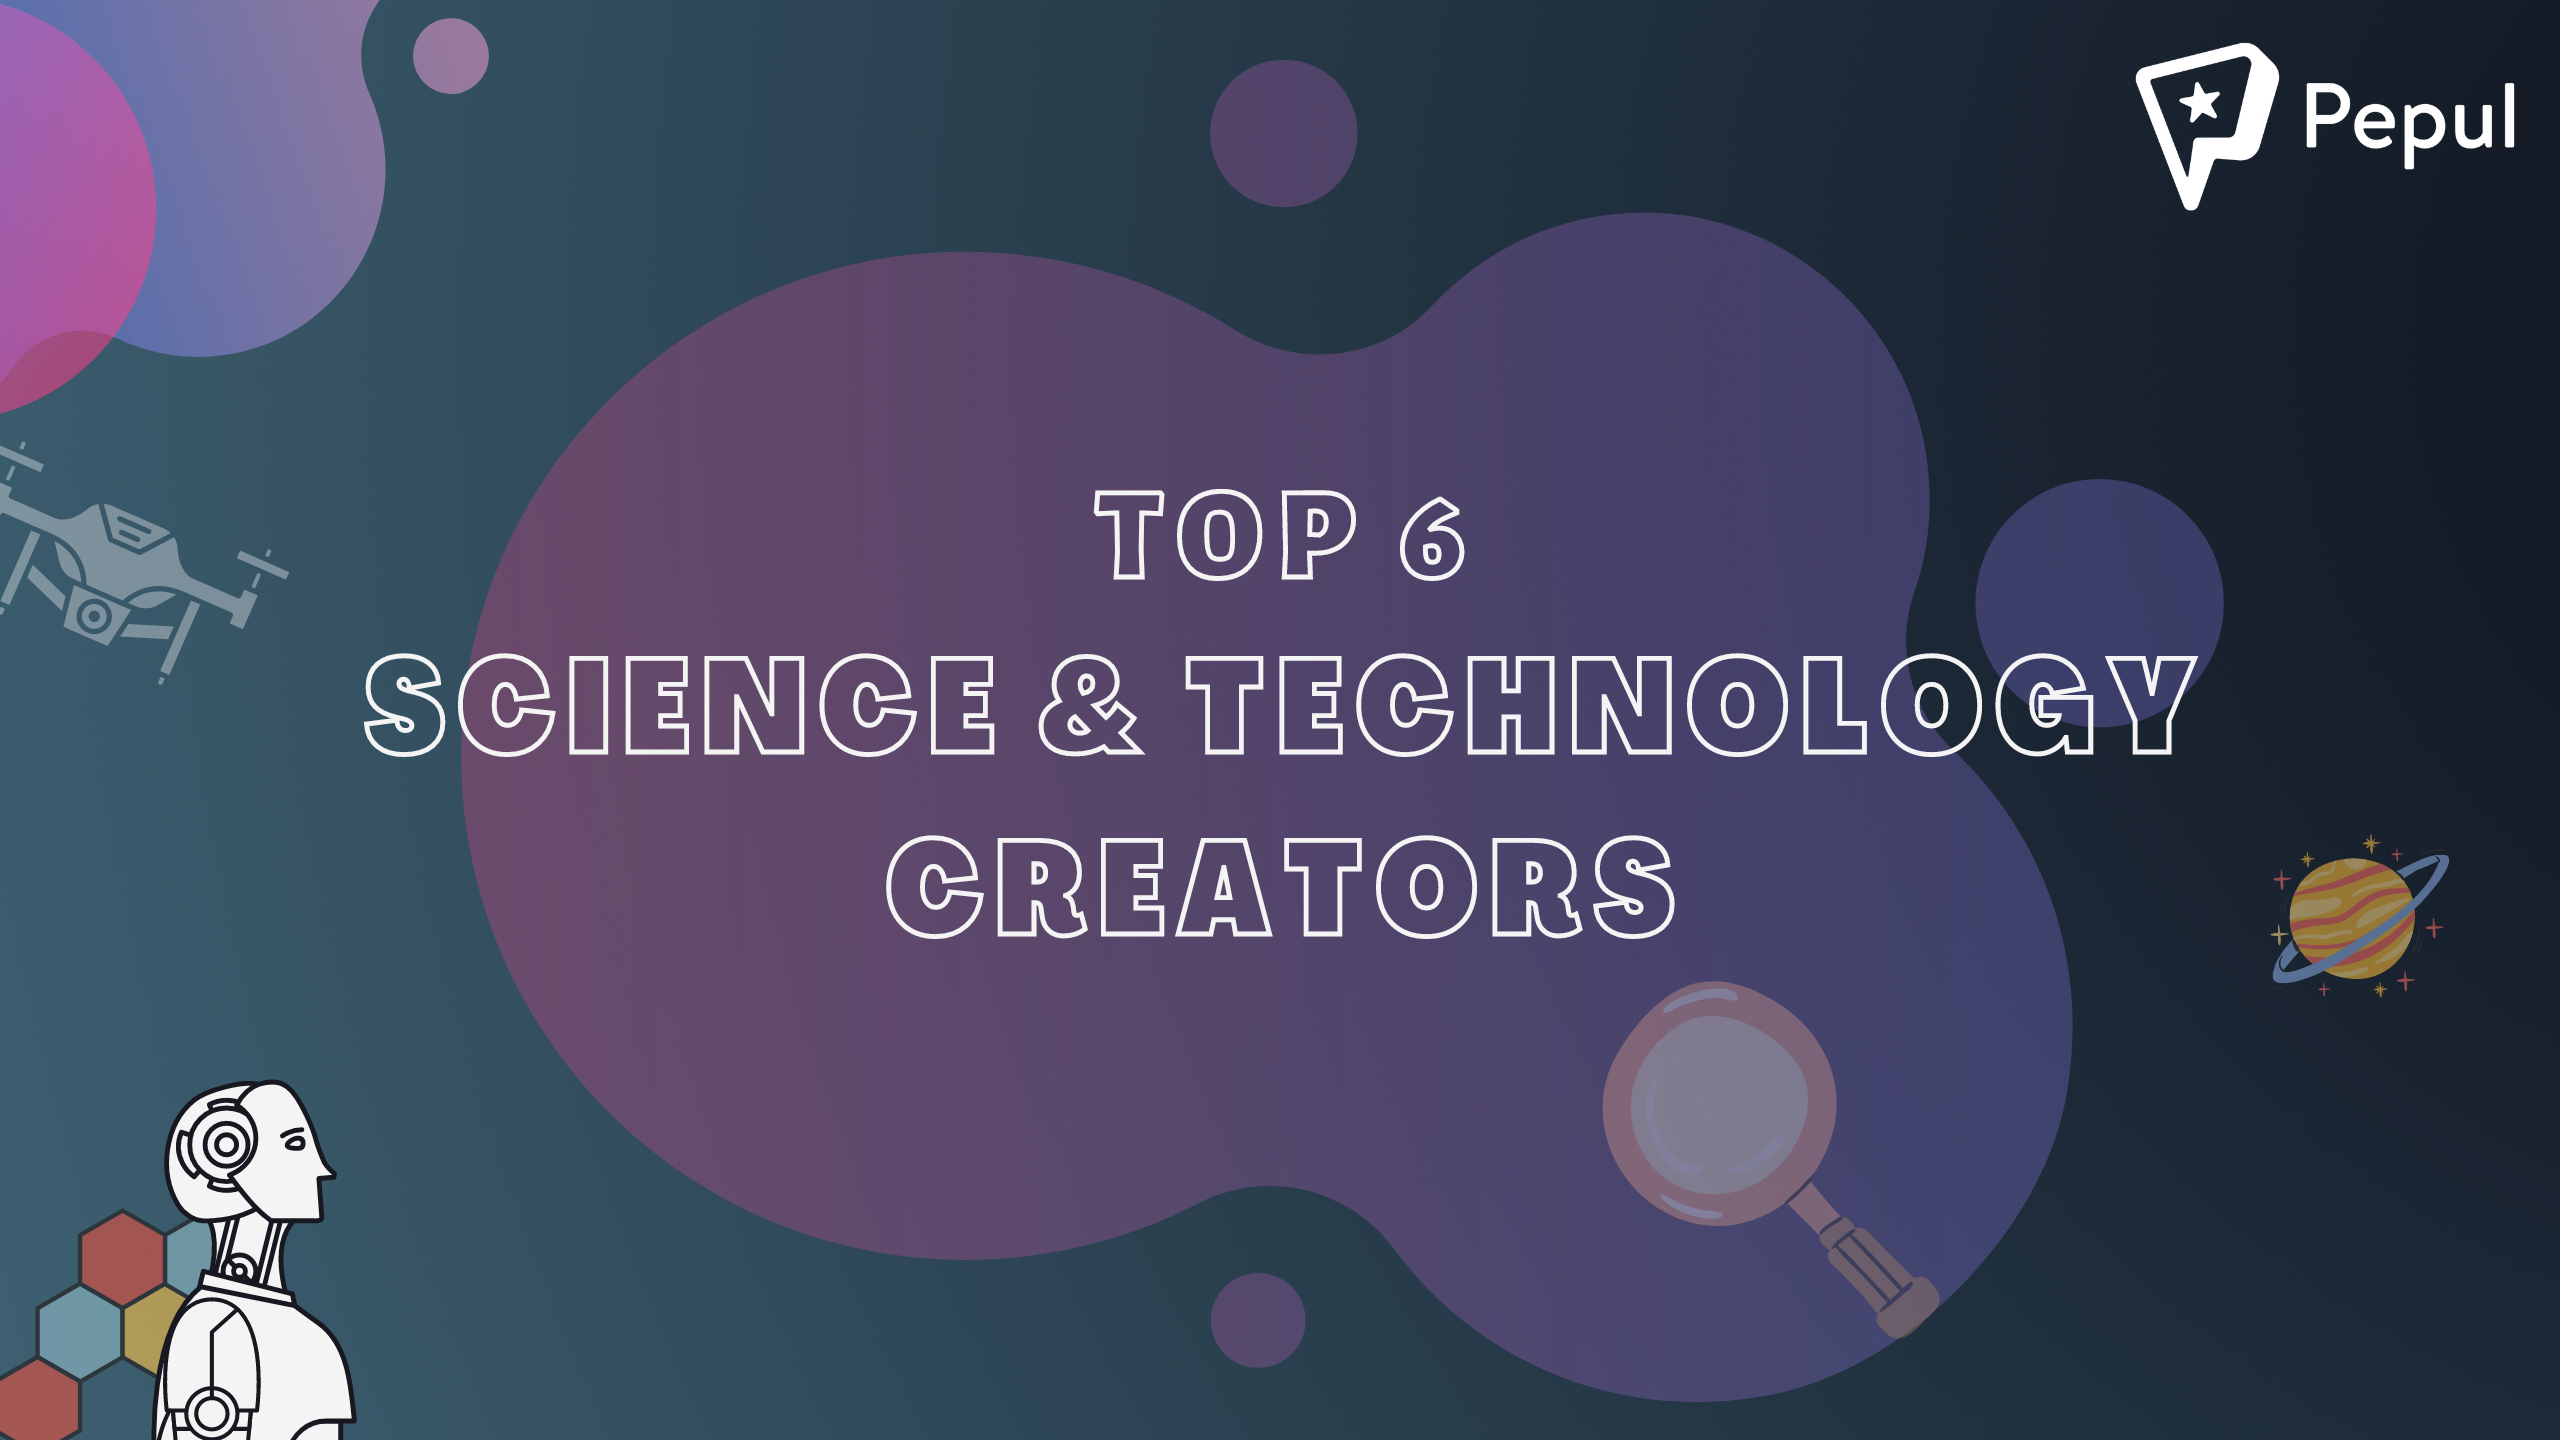 Top 6 Science and Technology Creators in Tamil Nadu